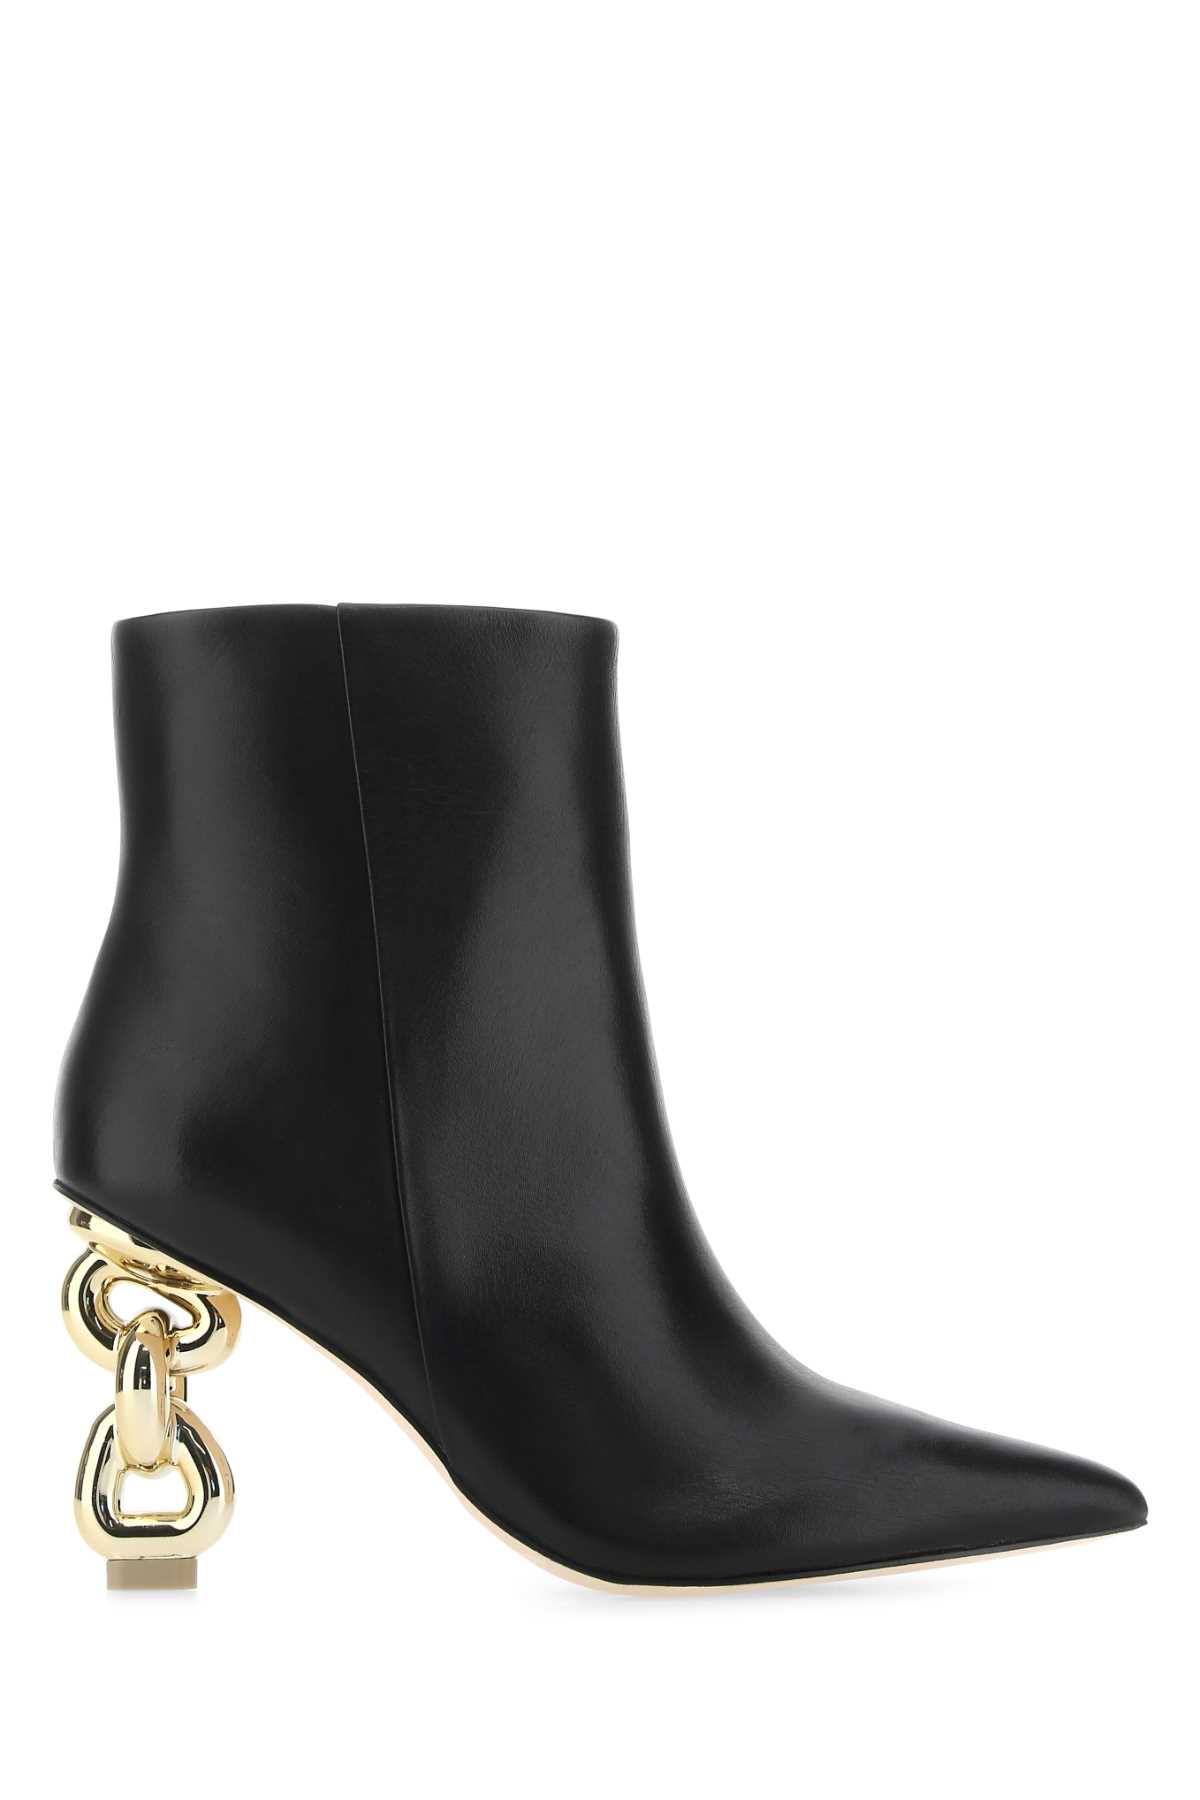 Cult Gaia Black Leather Zelma Ankle Boots